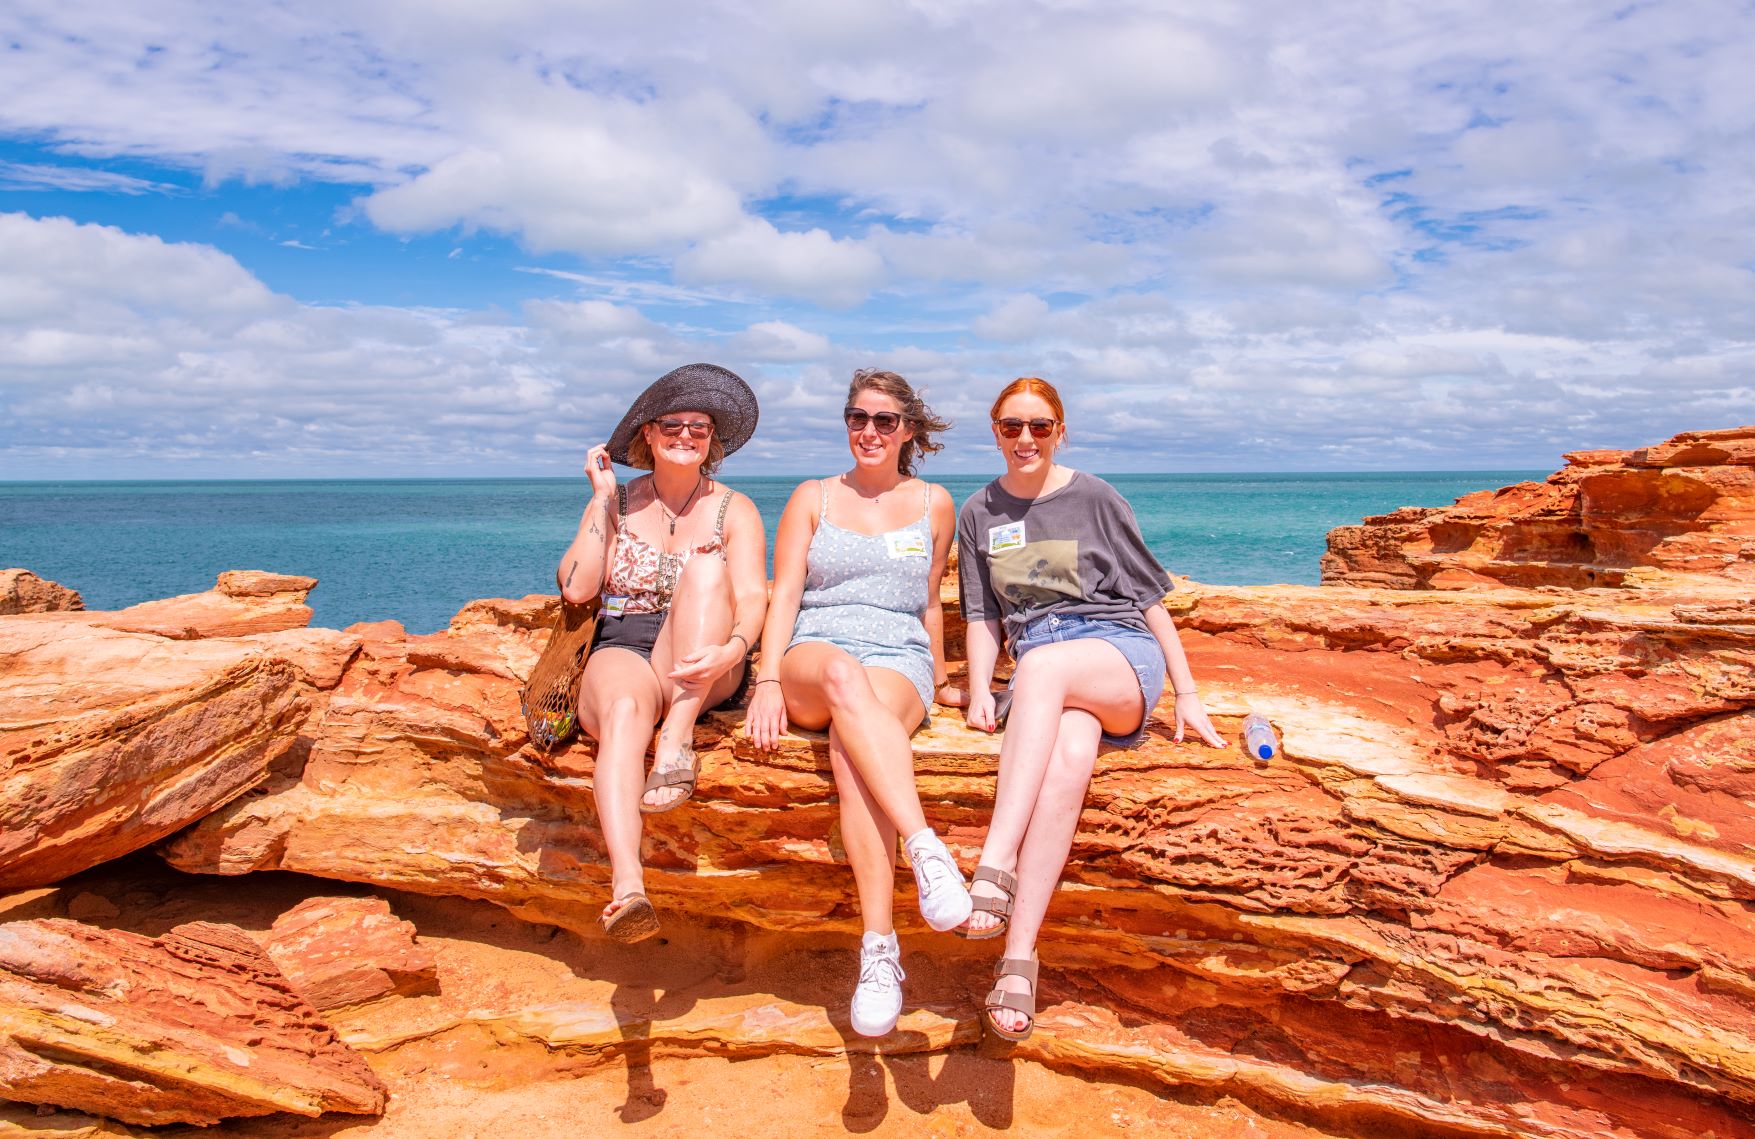 Broome Panoramic Town Tour - Best of Broome sights, culture and history